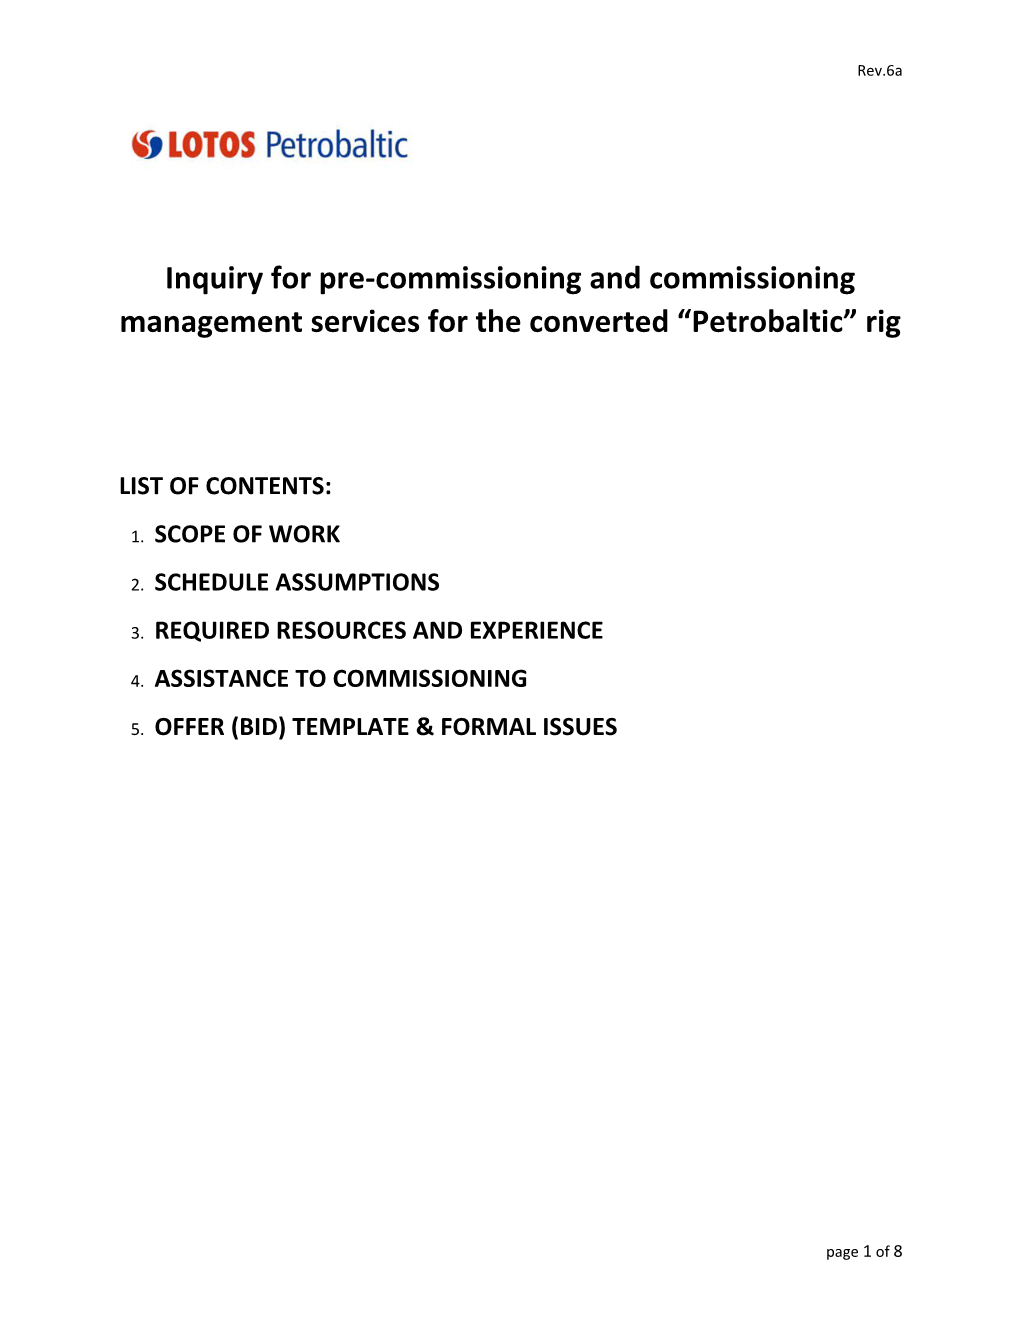 Inquiry for Pre-Commissioning and Commissioning Management Servicesfor the Converted